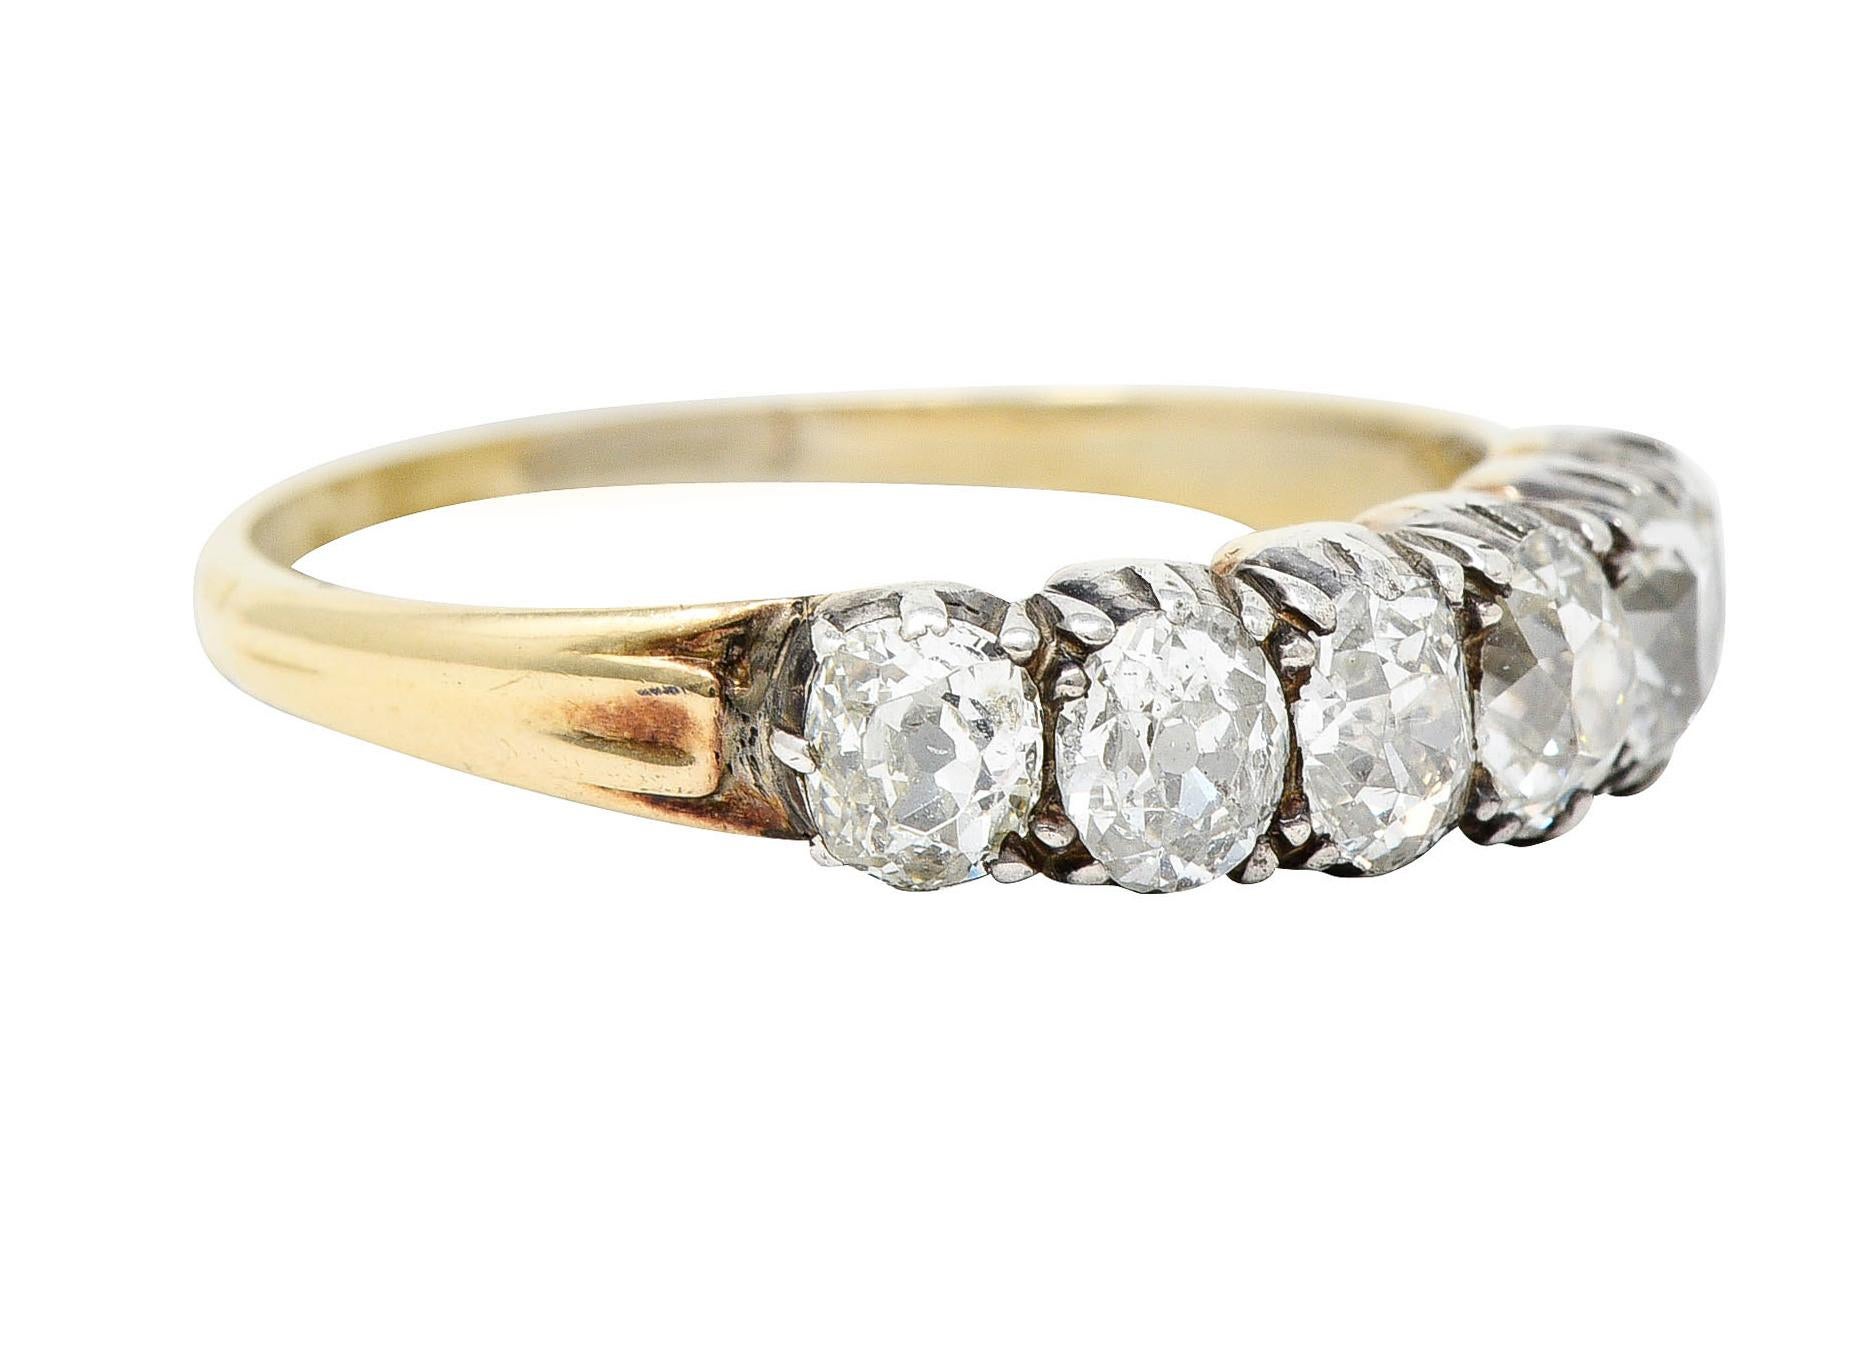 Band ring features old mine cut diamonds weighing in total approximately 1.45 carats - H/I color with SI clarity

Well matched and set in dimensional silver forms

Completed by a yellow gold shank with subtly grooved shoulders

Tested as